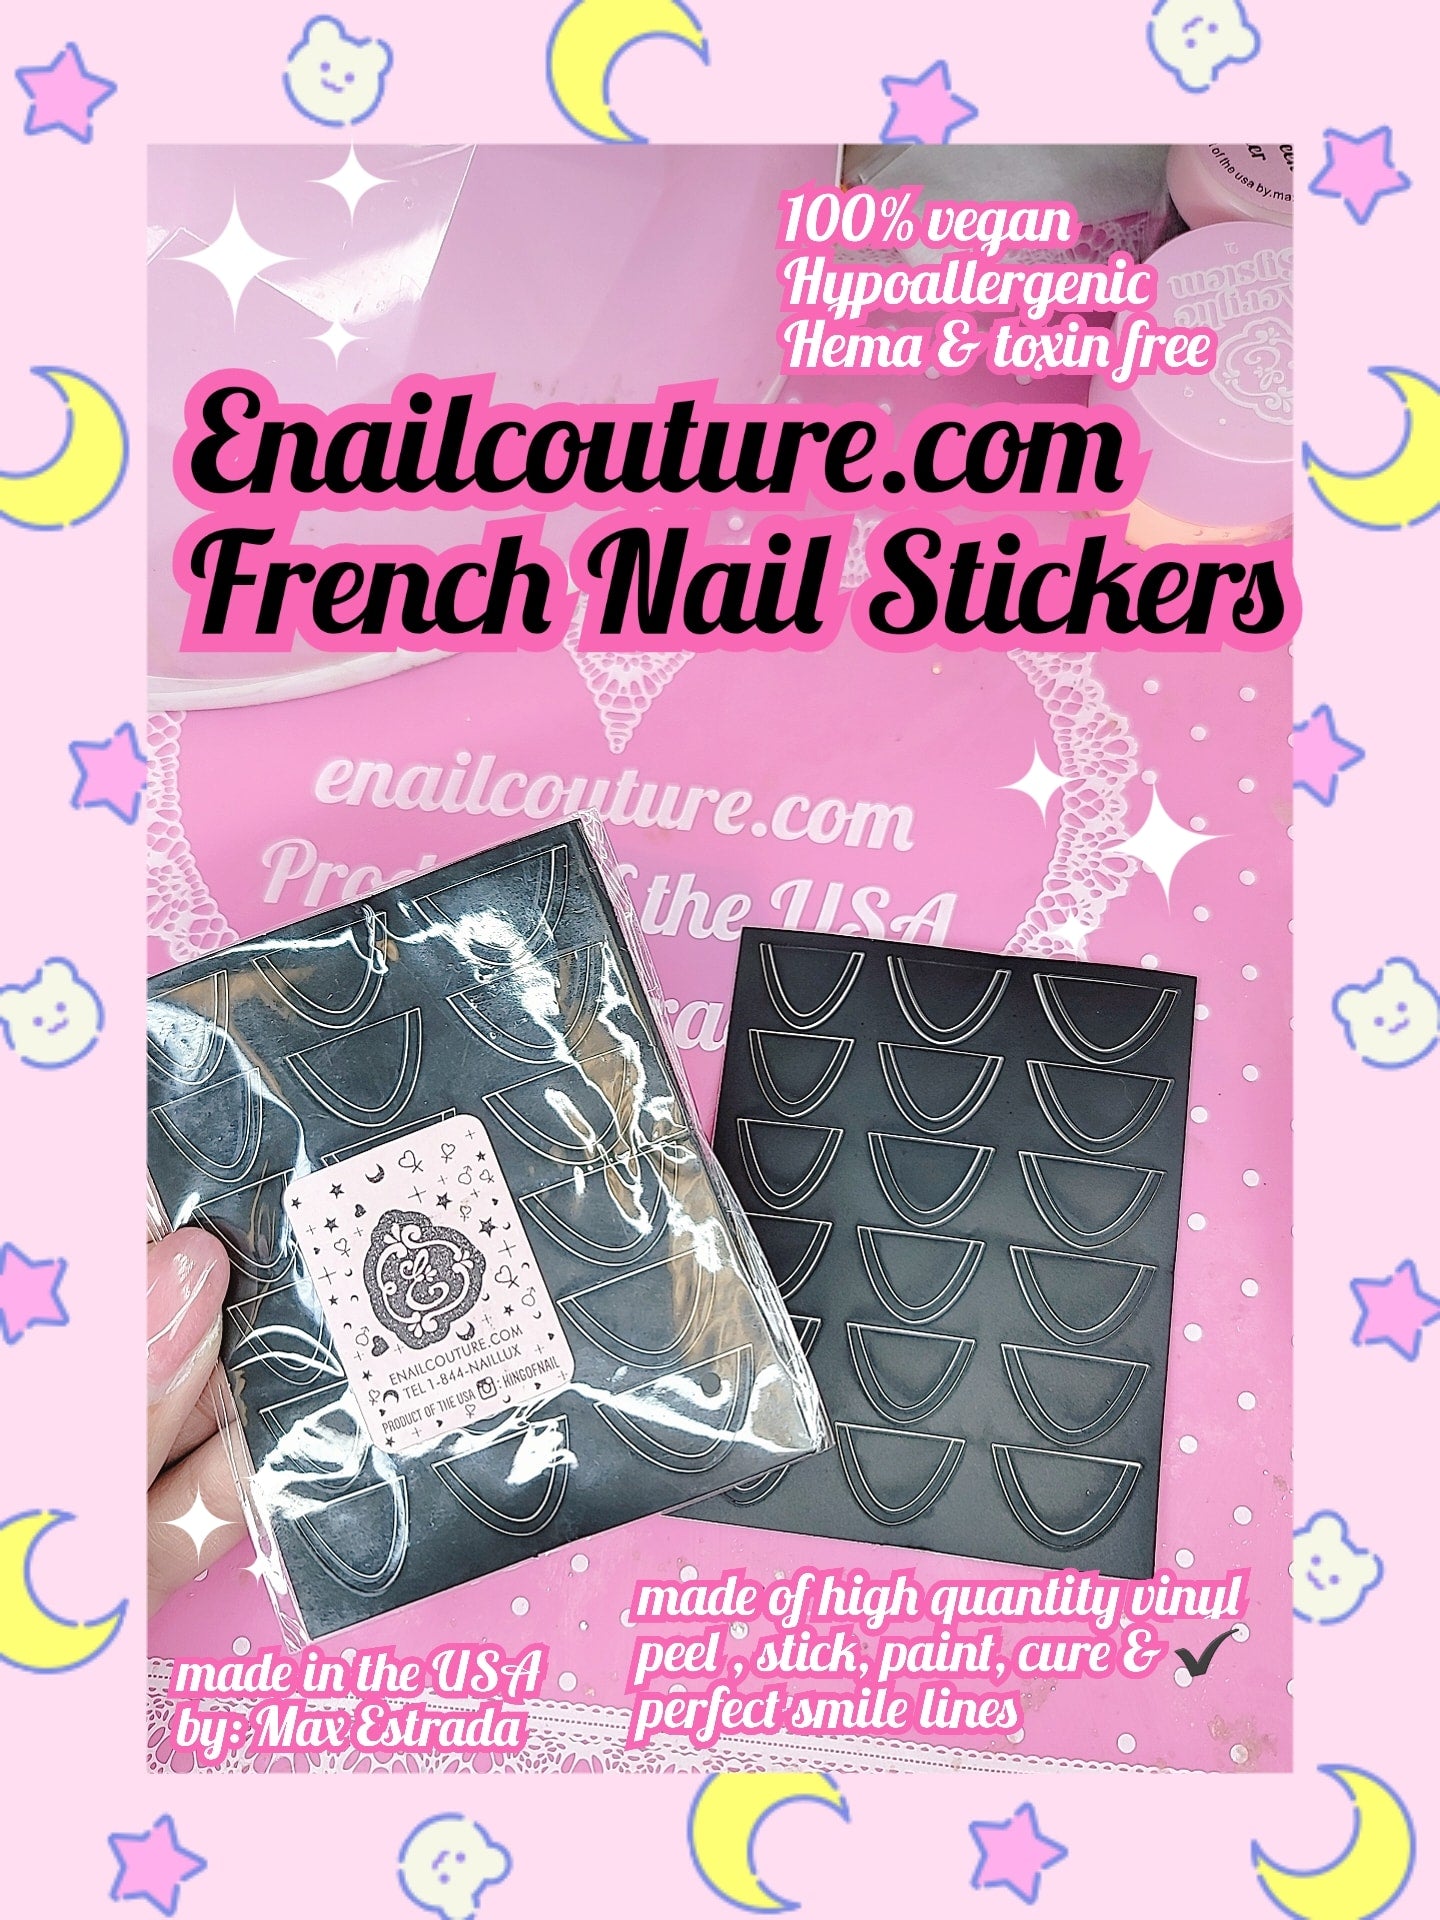 French Guide Map Stickers! (French Manicure Nail Art Stickers French Tip  Guides Stickers French Nail Stickers Form Fringe Guides for DIY Decoration